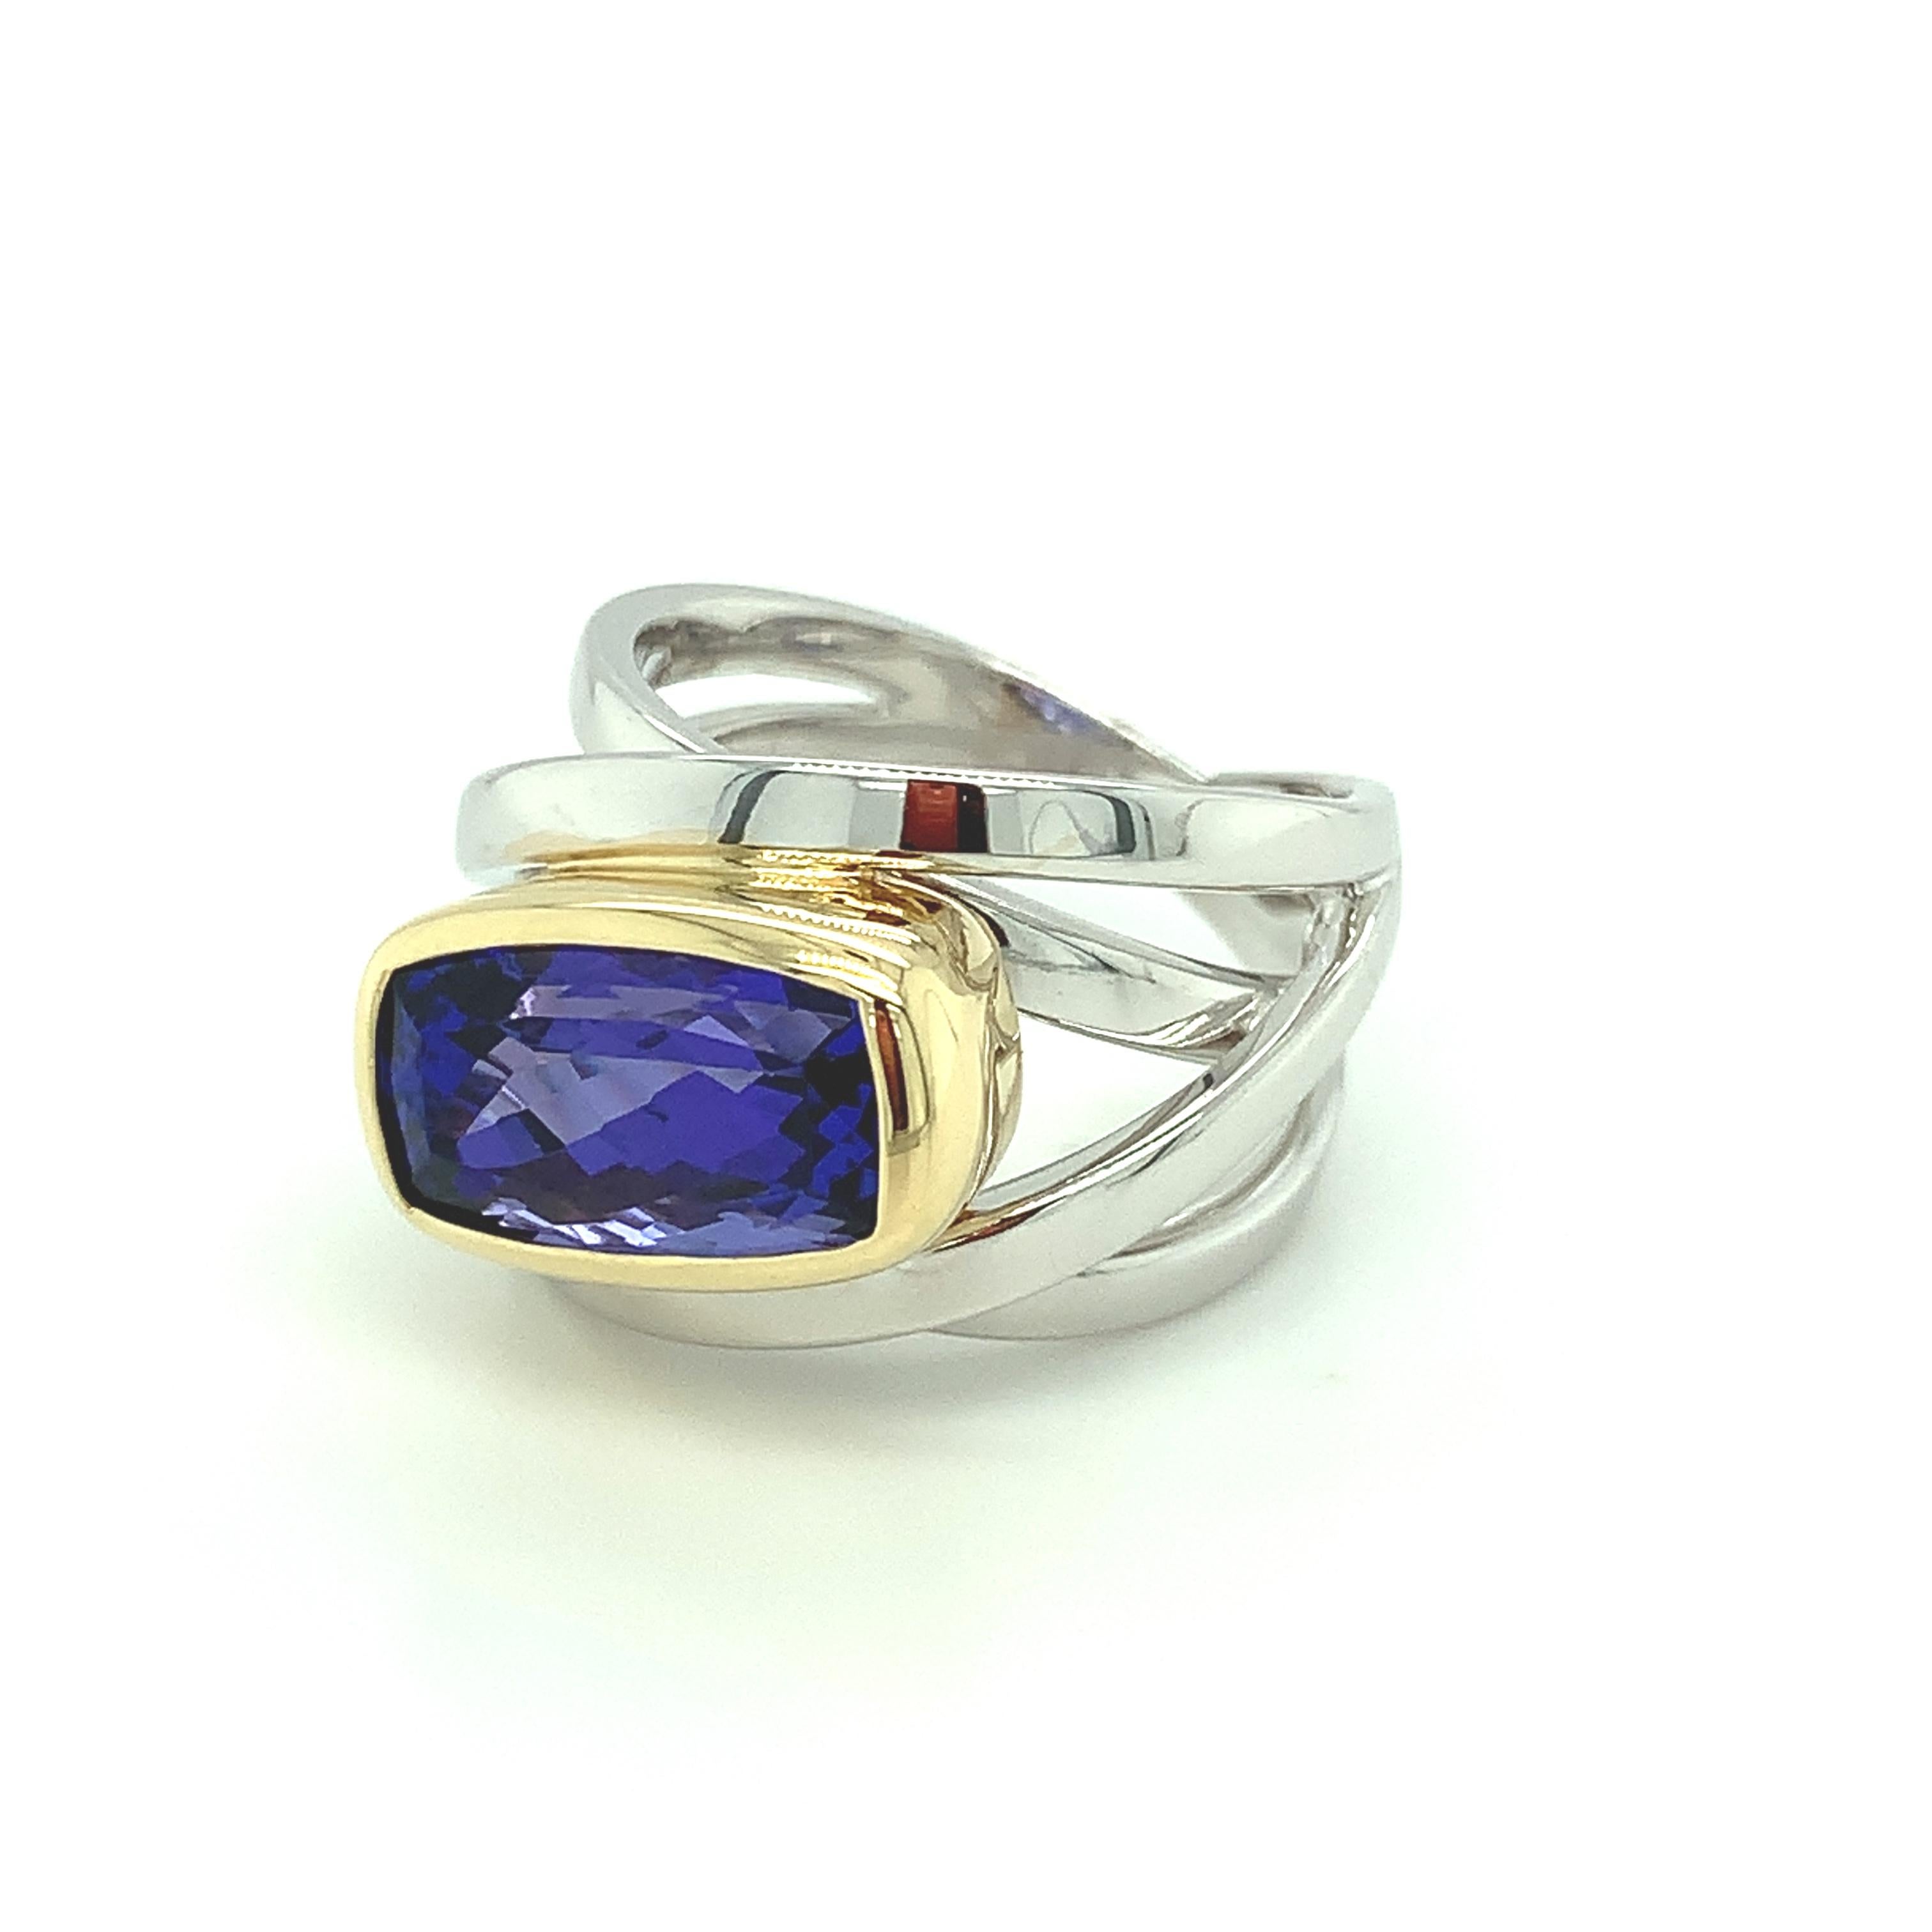 A 6.02 carat gem tanzanite the color of African violets is bezel set in our chic and stylish wraparound band ring. This ring is a versatile and seamless design that can be worn any time of day or night, whether you're working from home or out